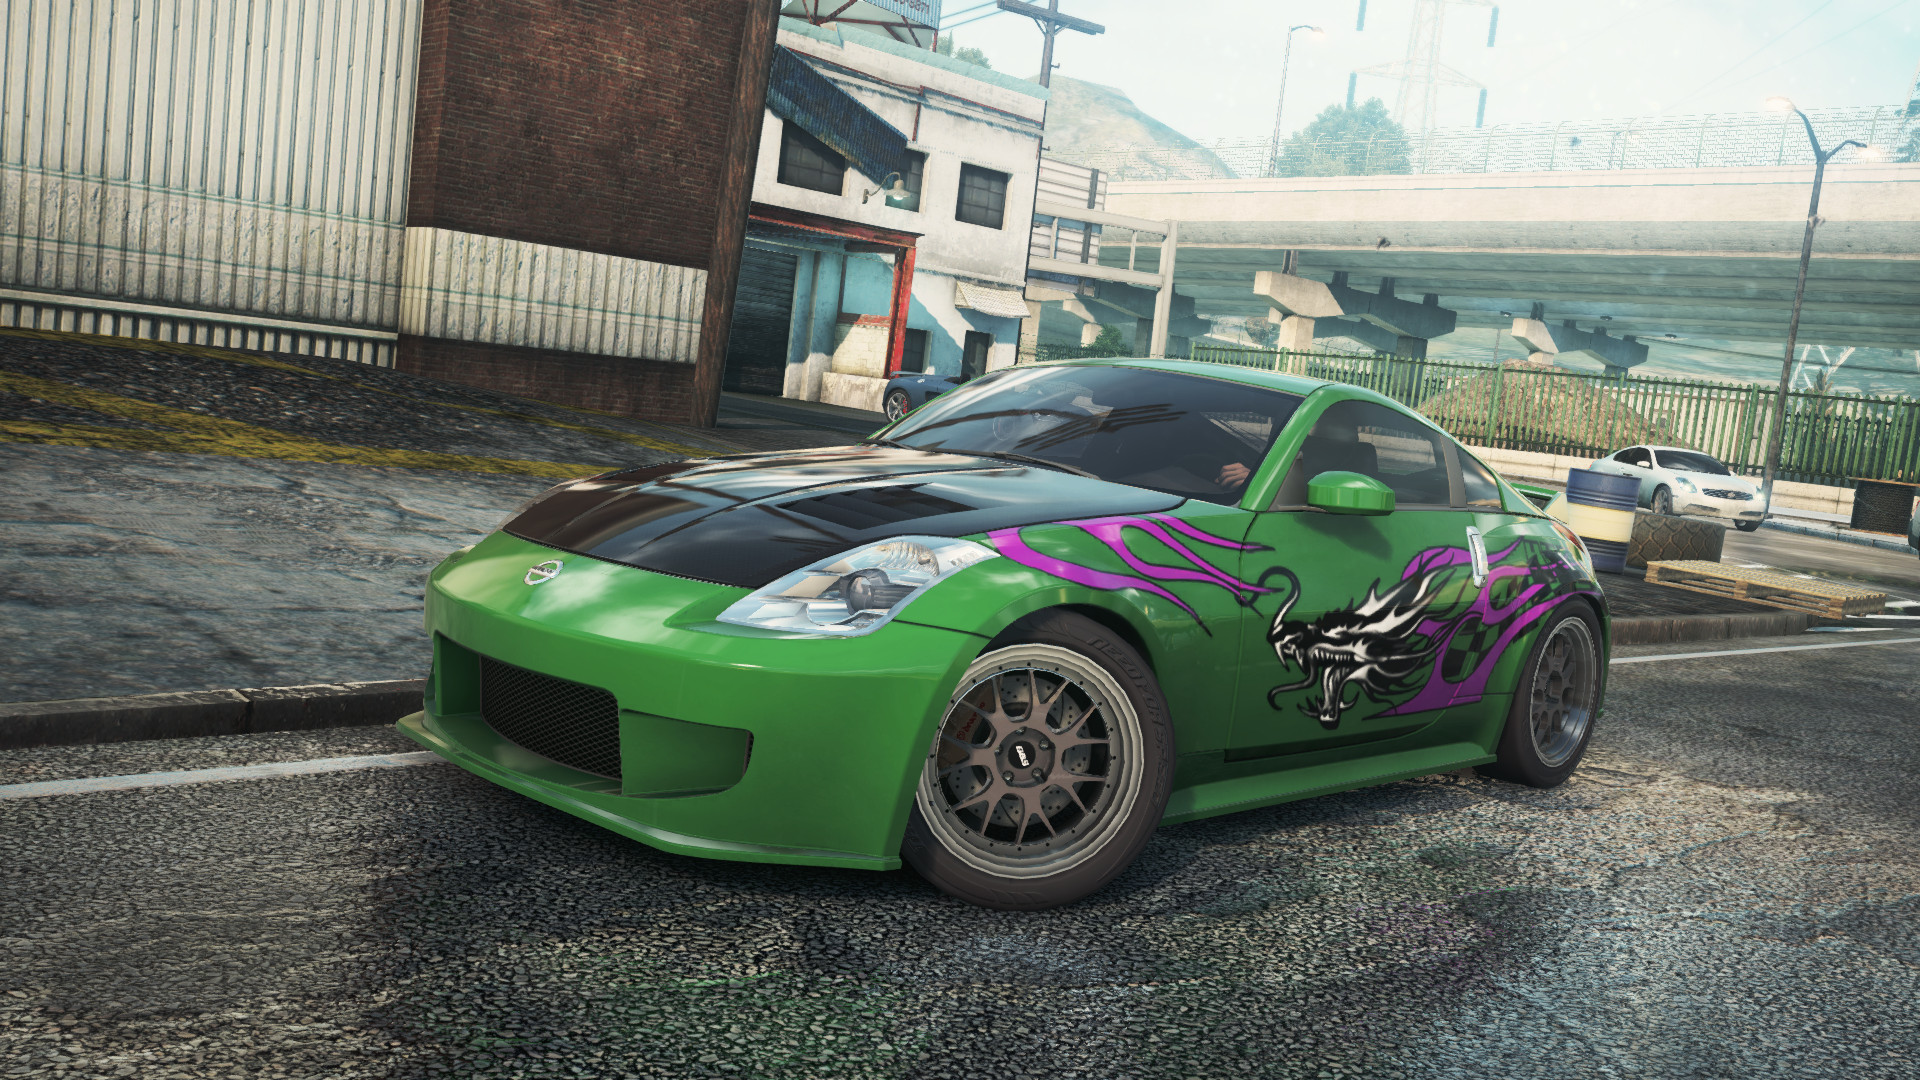 Need For Speed Most Wanted 2012 NFSMW12 - Rachel's 350z Livery